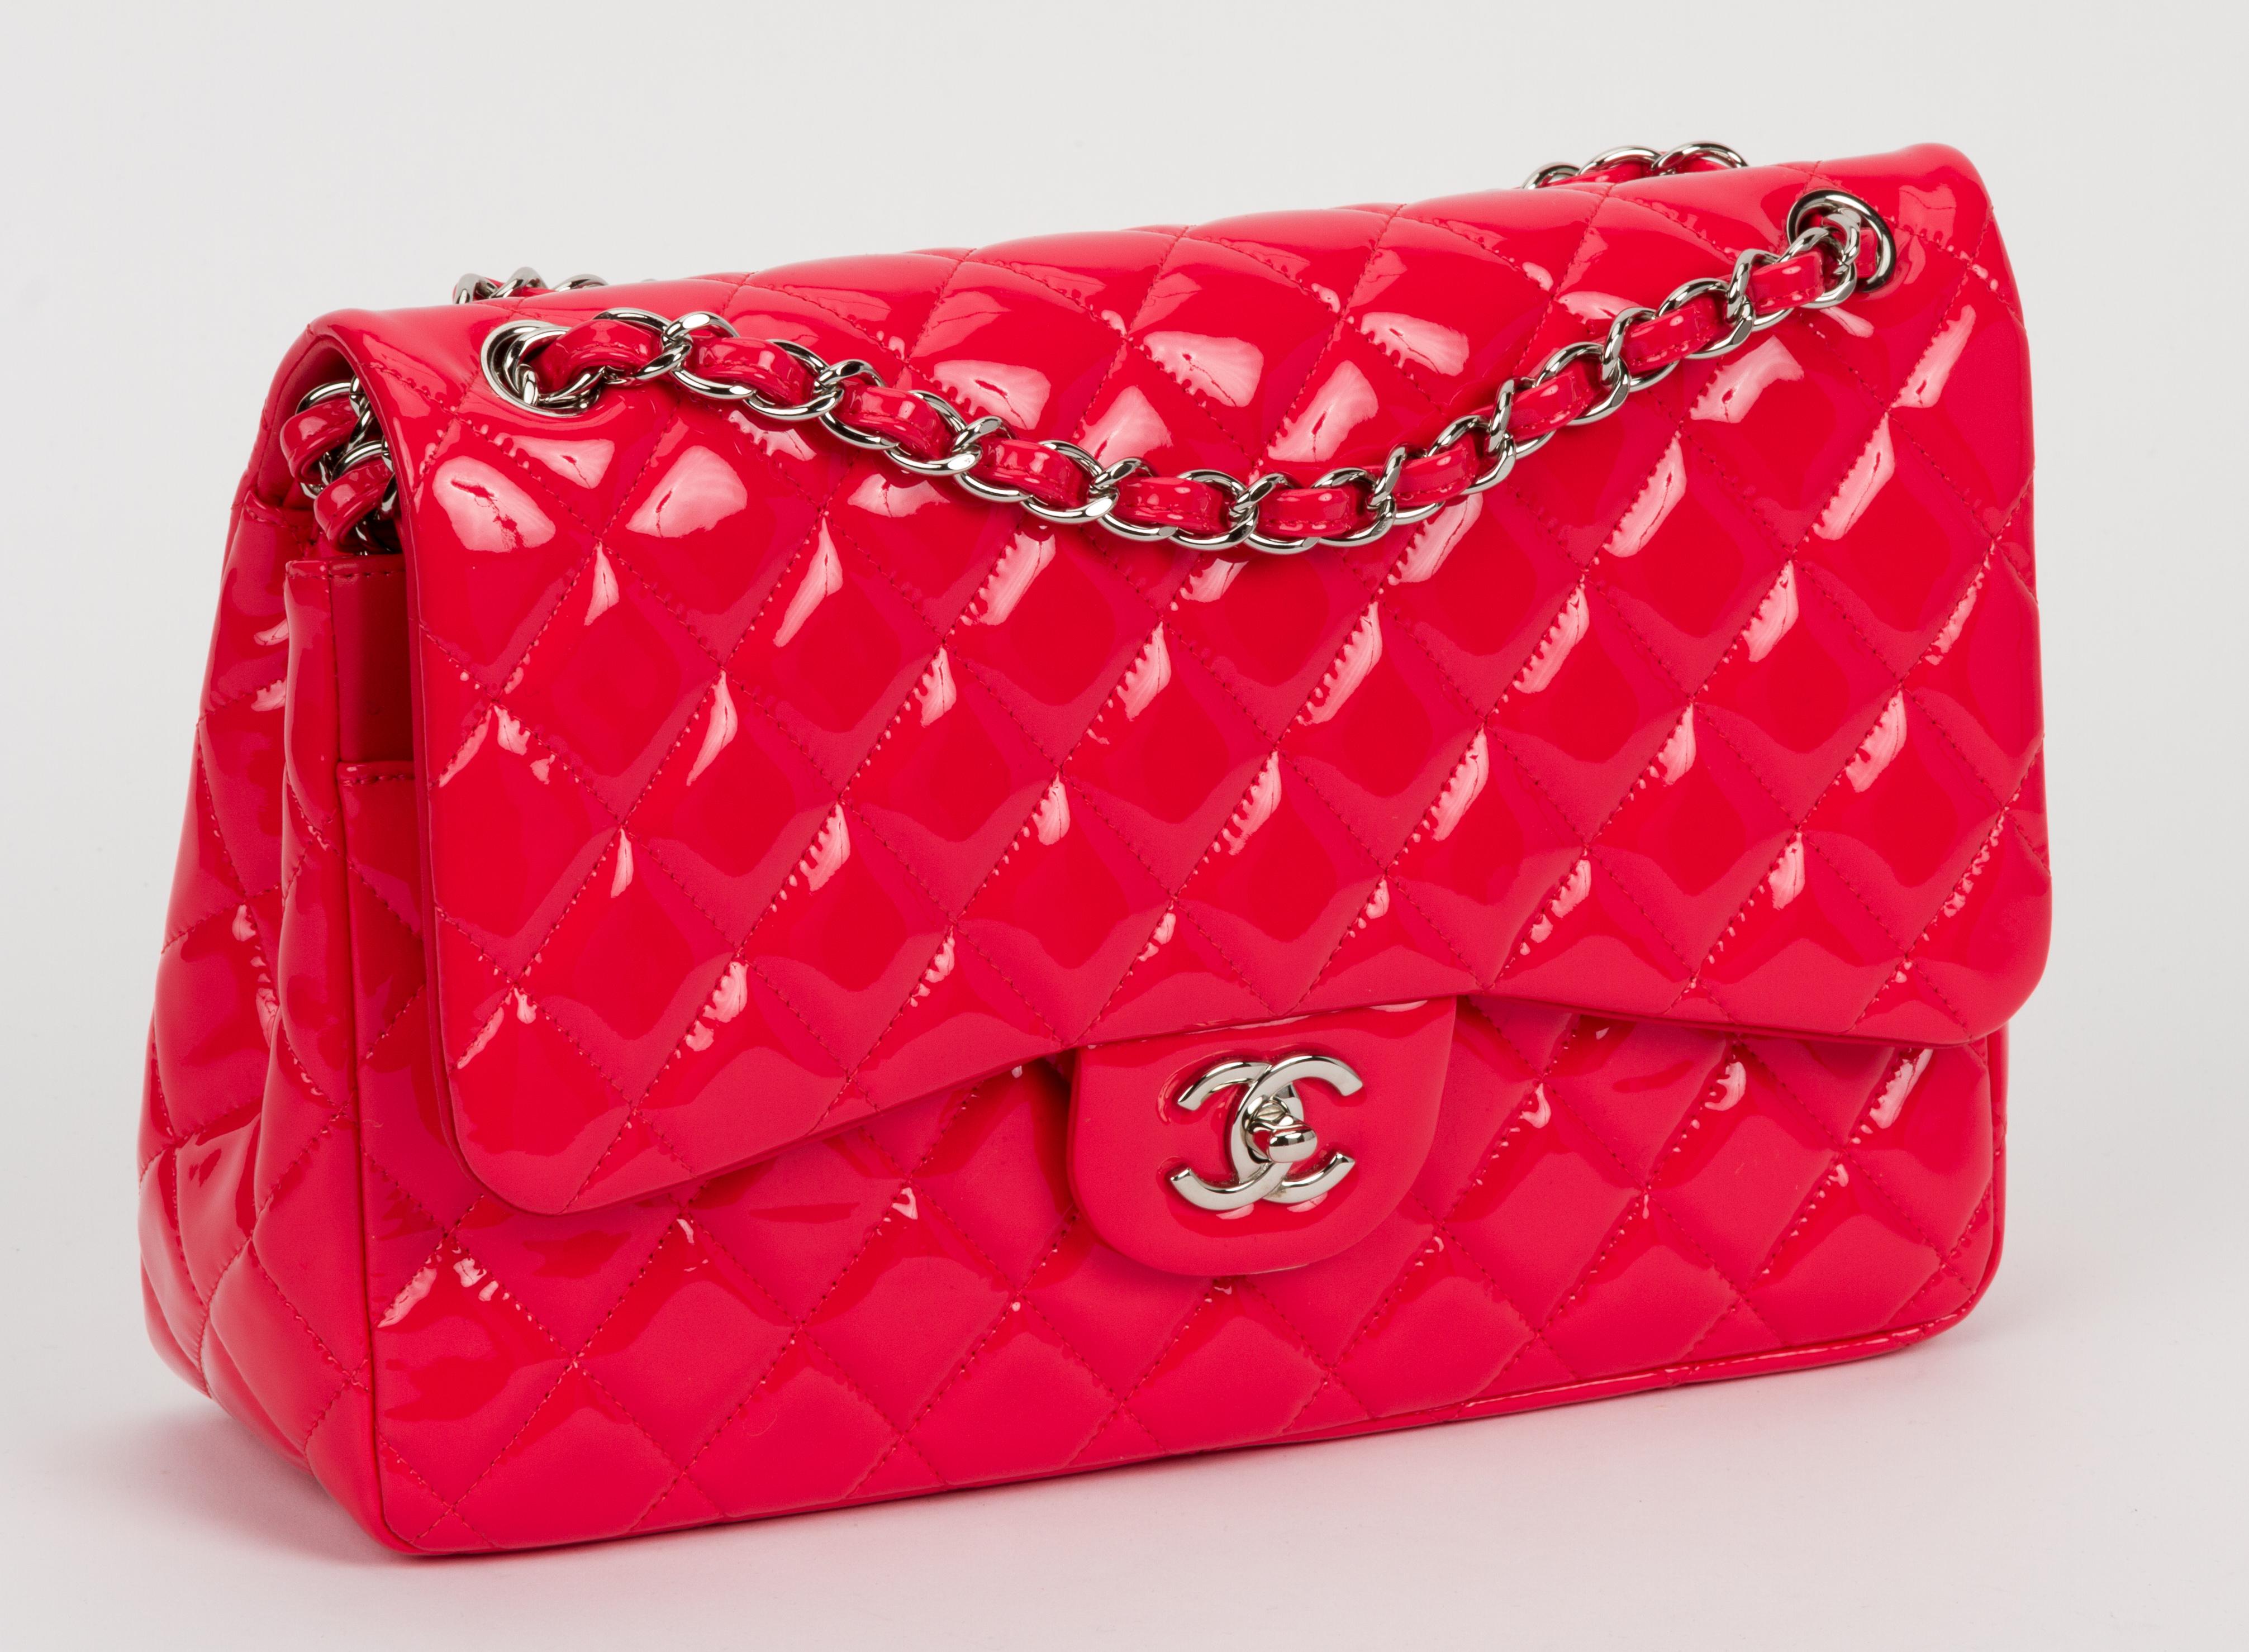 Chanel new jumbo classic double flap. Coral patent leather quilted with silver tone metal hardware. Single drop 24